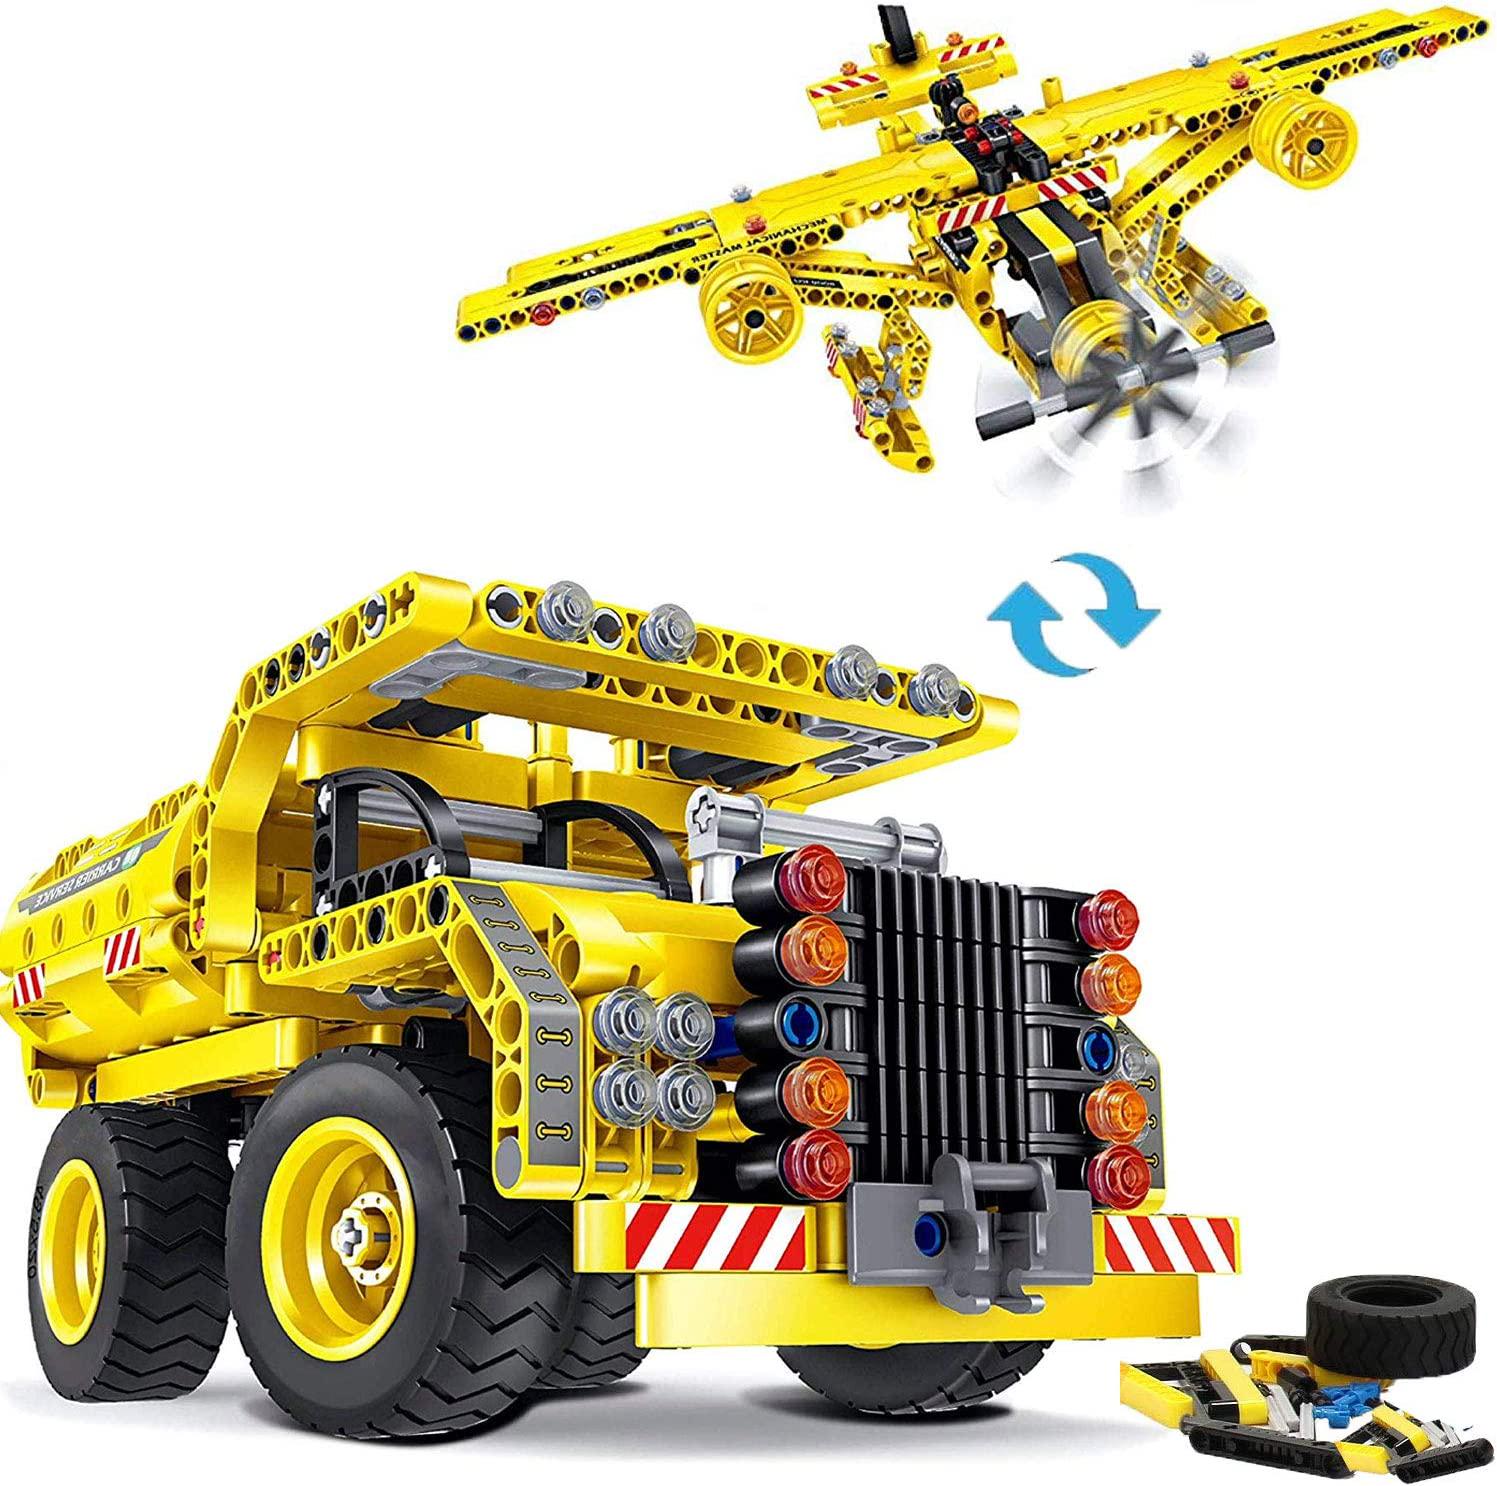 M&Ostyle, M&Ostyle STEM Toy Building Sets for Boys Girls 8-12Construction Engineering Kit Builds Dump Truck or Airplane (2in1) STEM Building Toy Set for Kids - Ages 8 9 10 11 12 Years Old, Boy Toys Gift(361PCS)